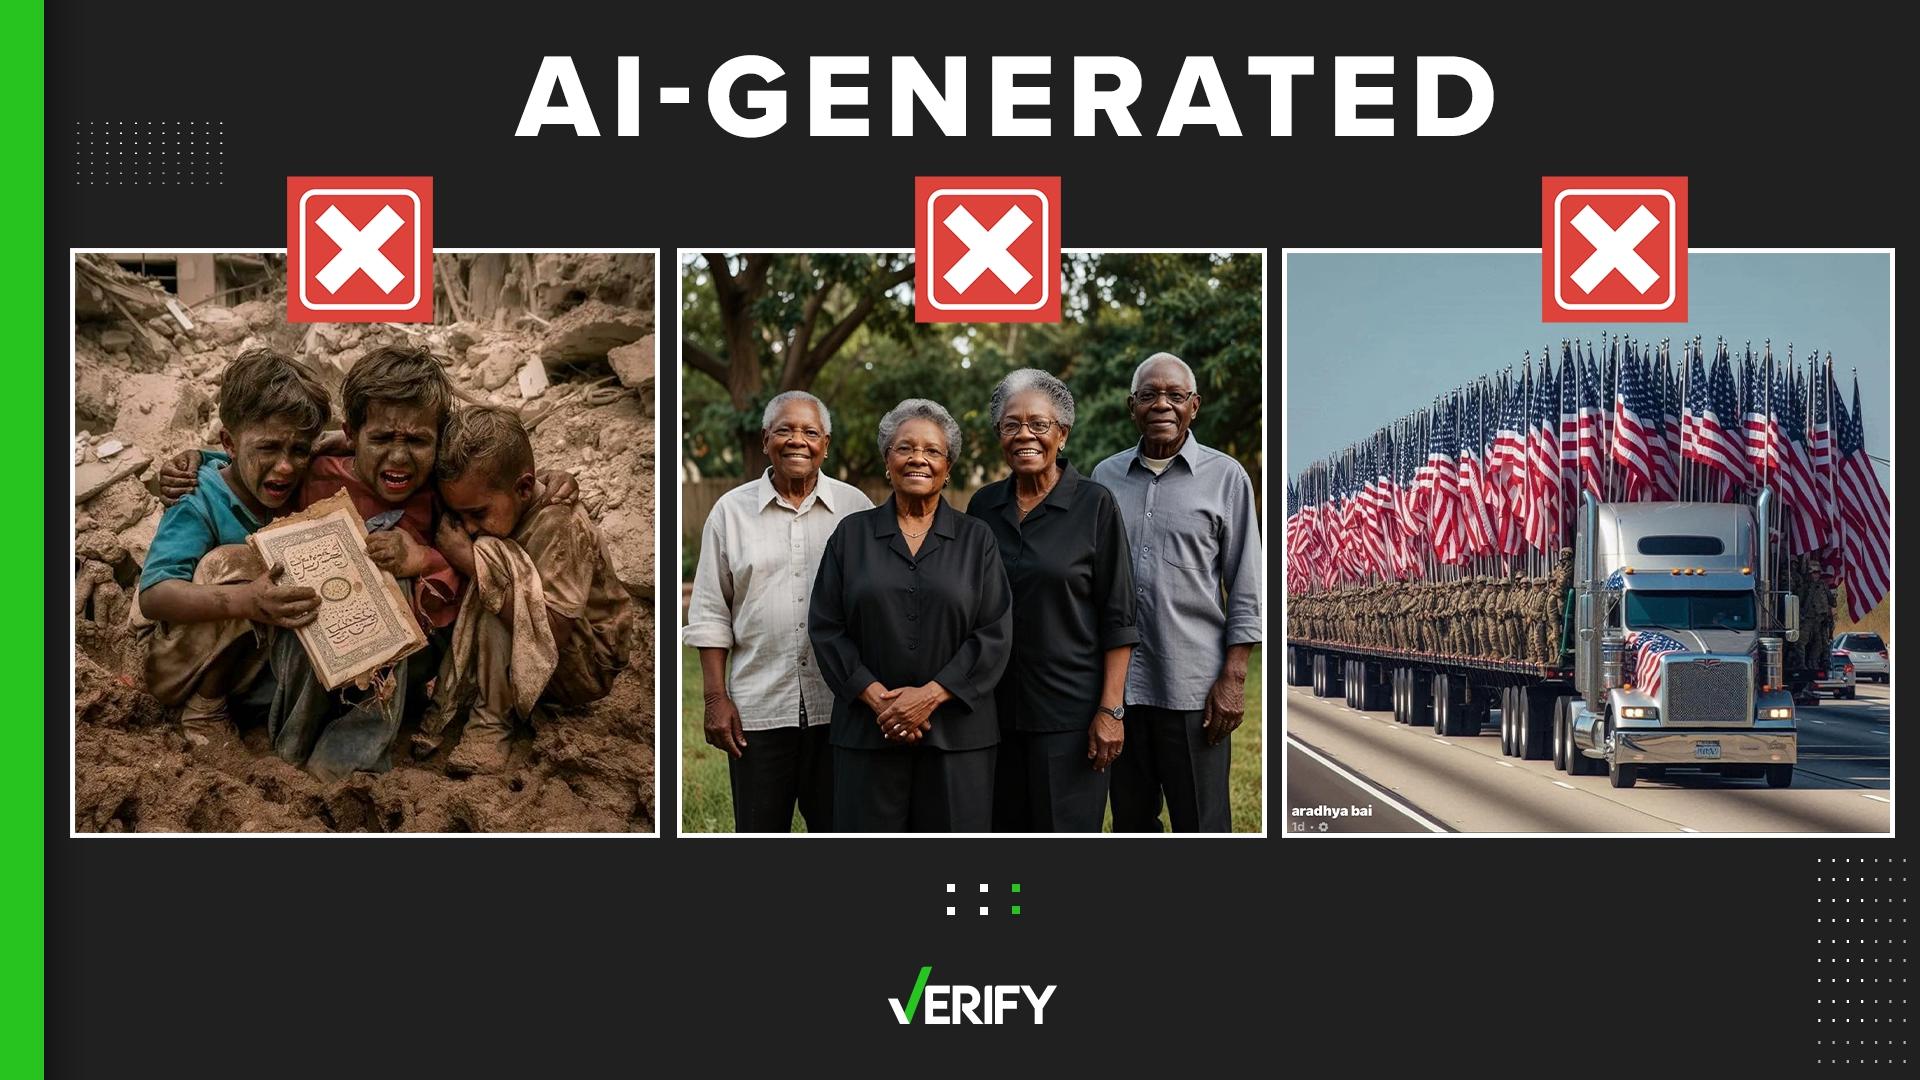 Striking AI-generated images of service members, quadruplets or children in rubble are often shared on Facebook, and they could be used as part of a scam tactic.